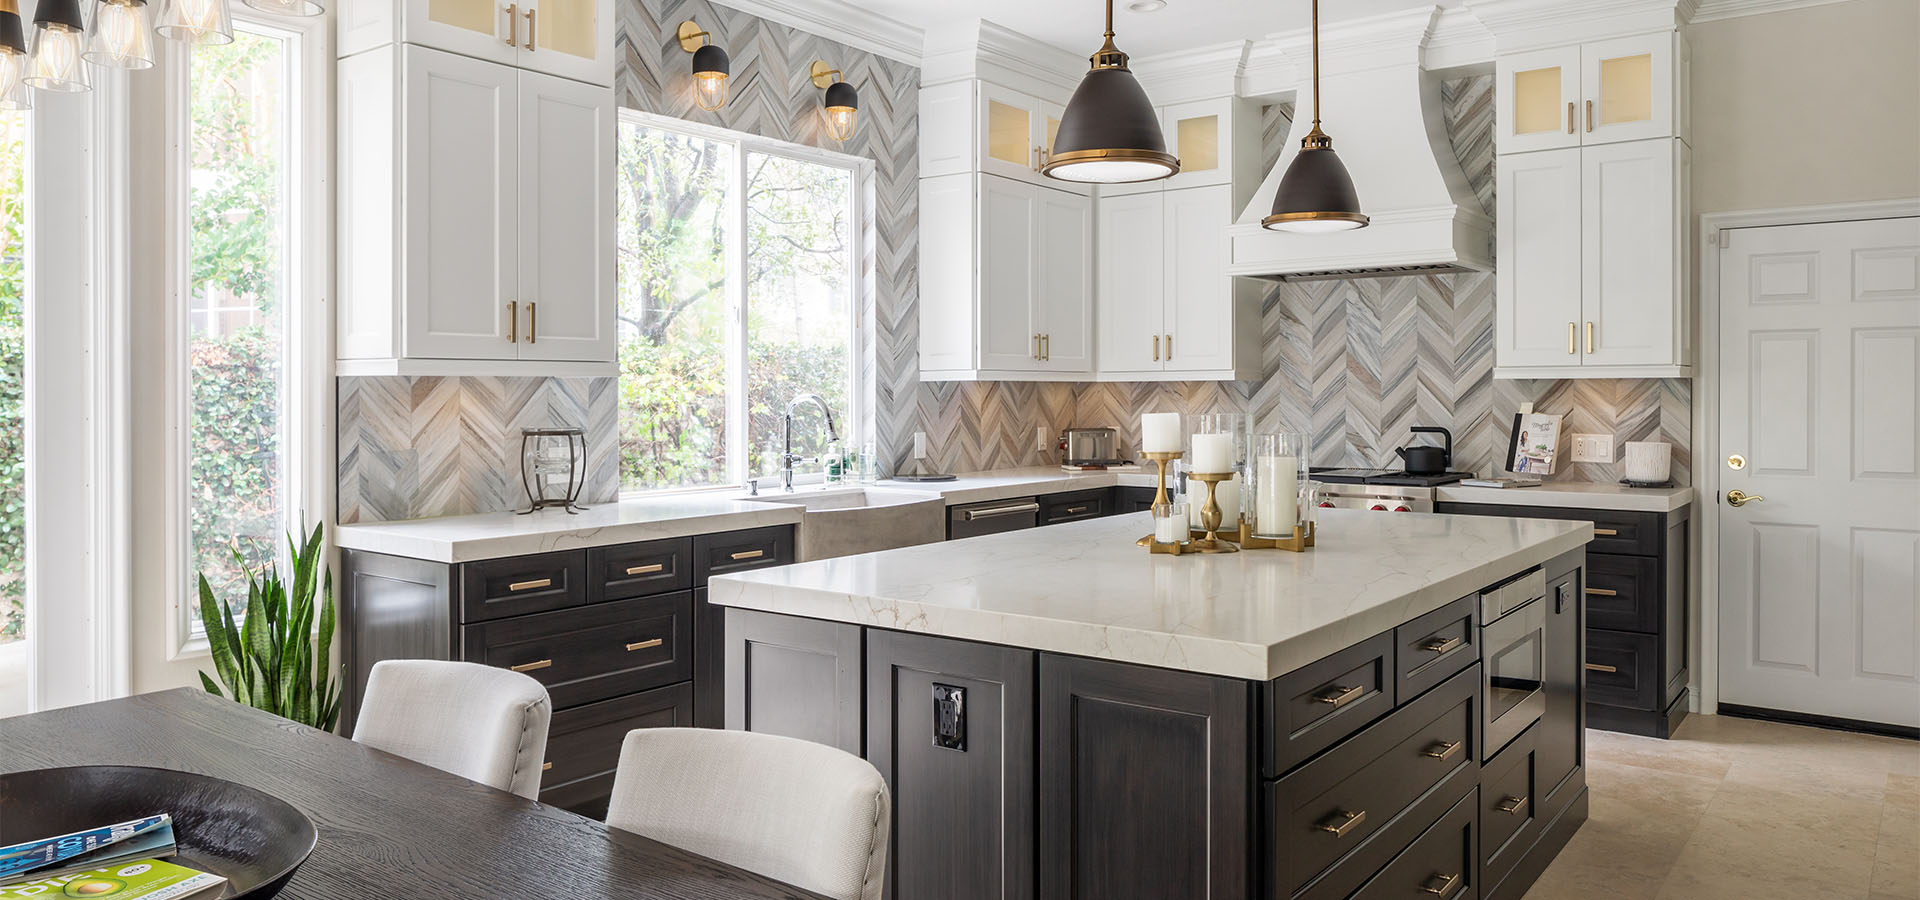 kitchen and bath remodeling in orange county ca